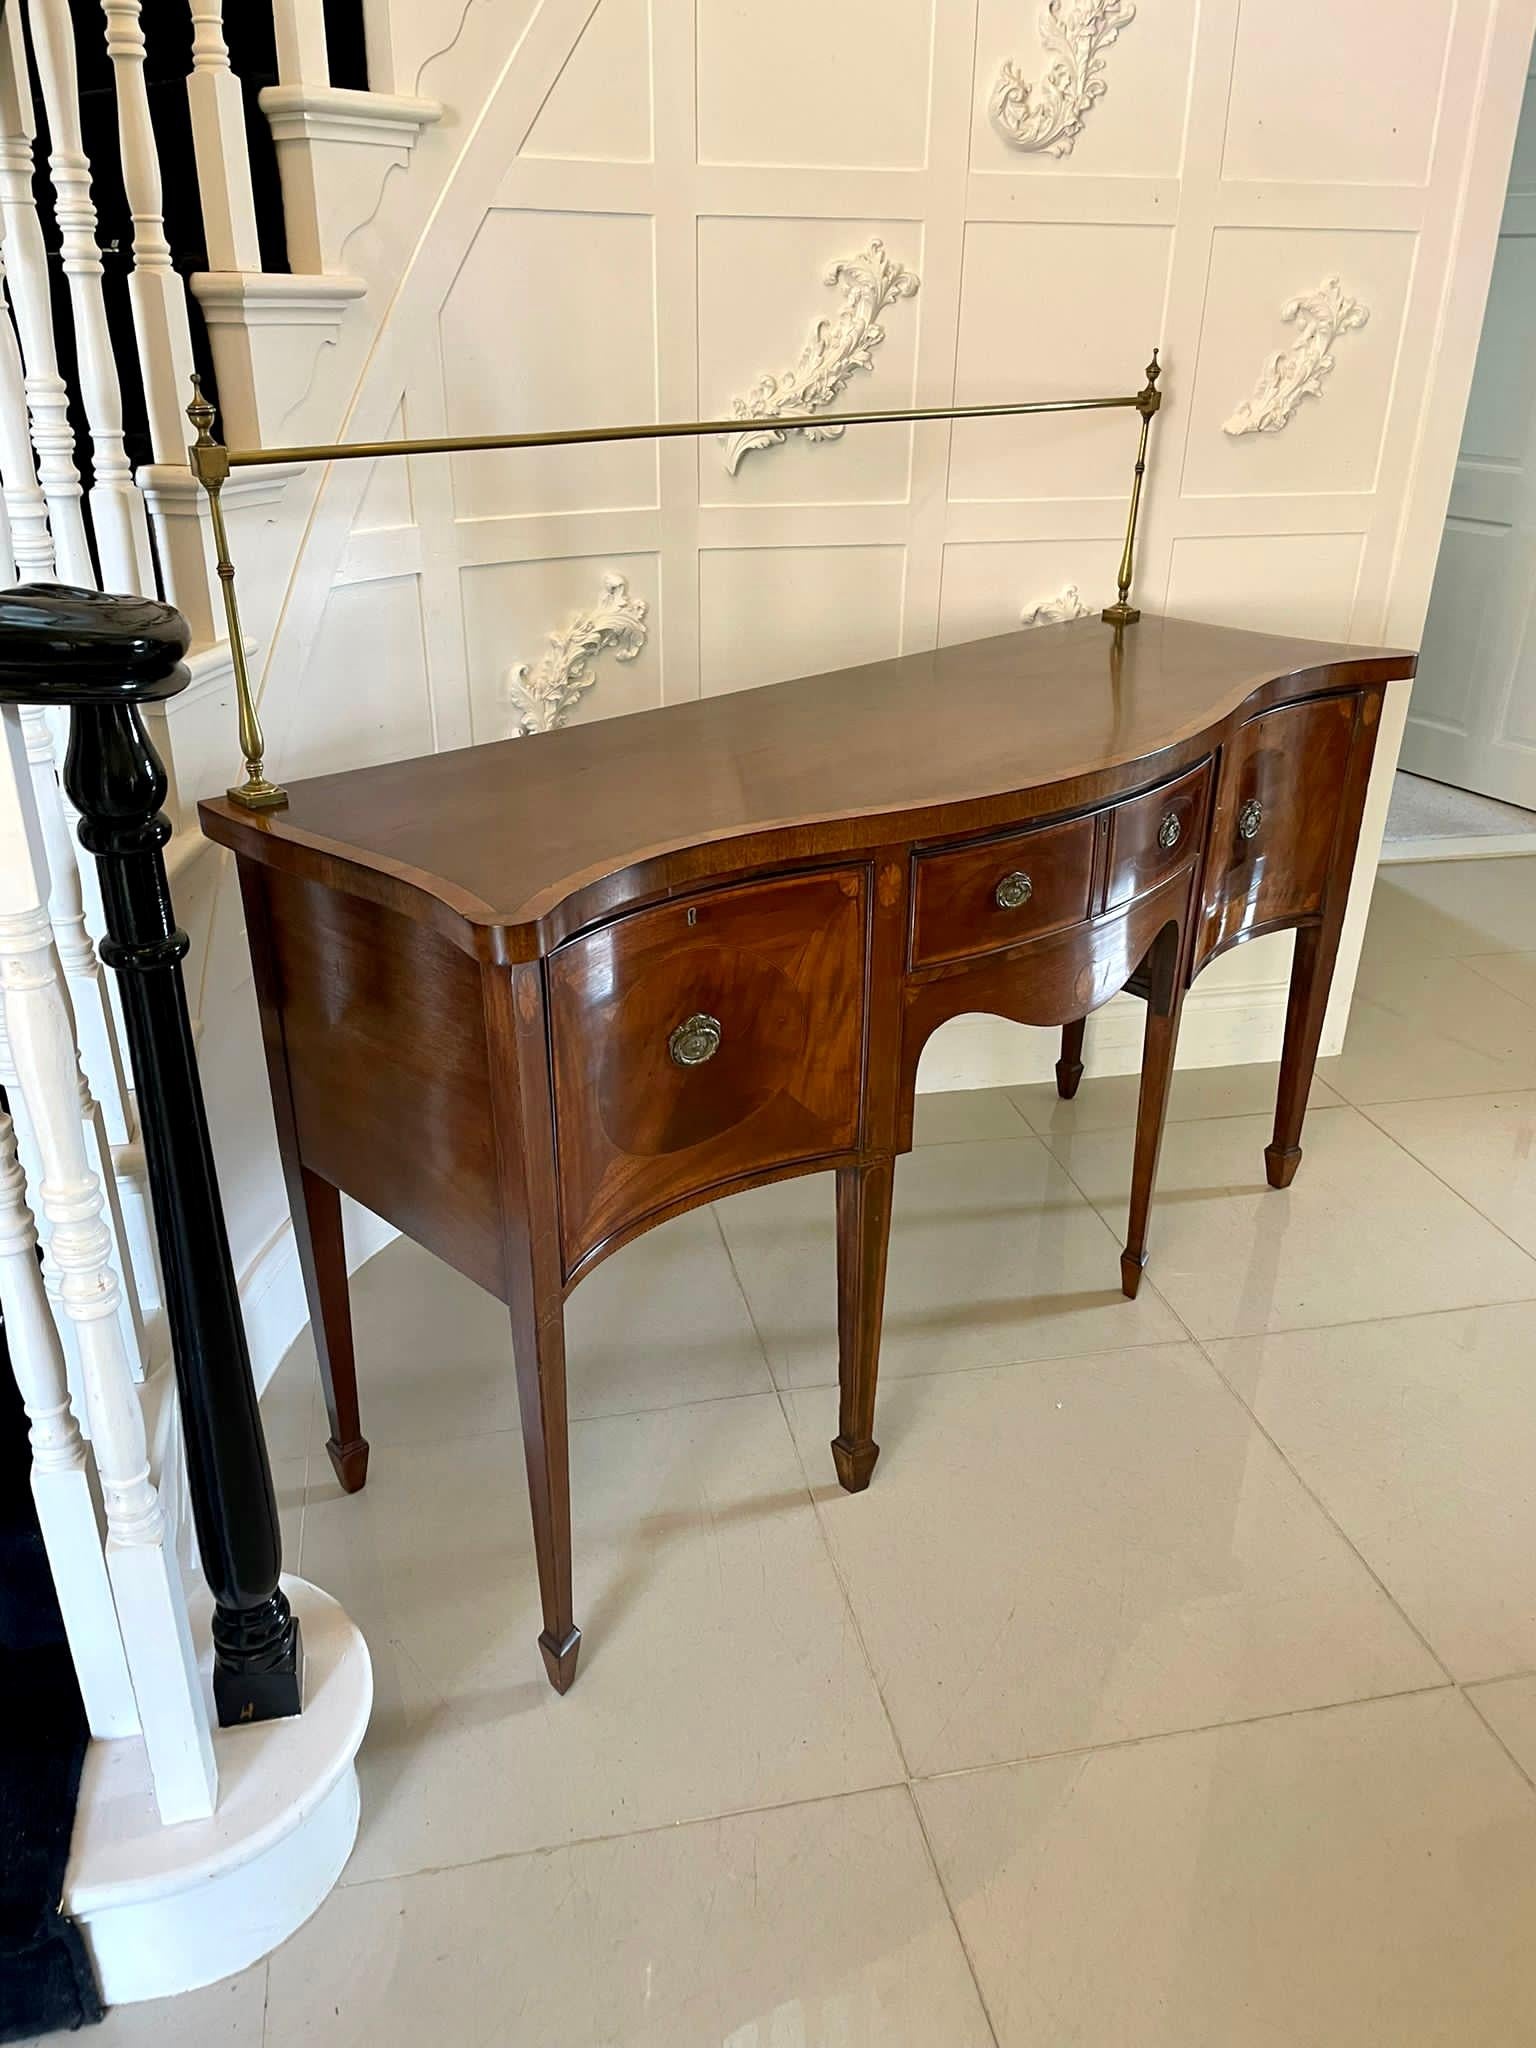 Antique George III quality mahogany inlaid serpentine shaped sideboard having a quality mahogany serpentine shaped top with satinwood crossbanding and the original brass rail above a bow fronted shaped drawer with satinwood crossbanding, original